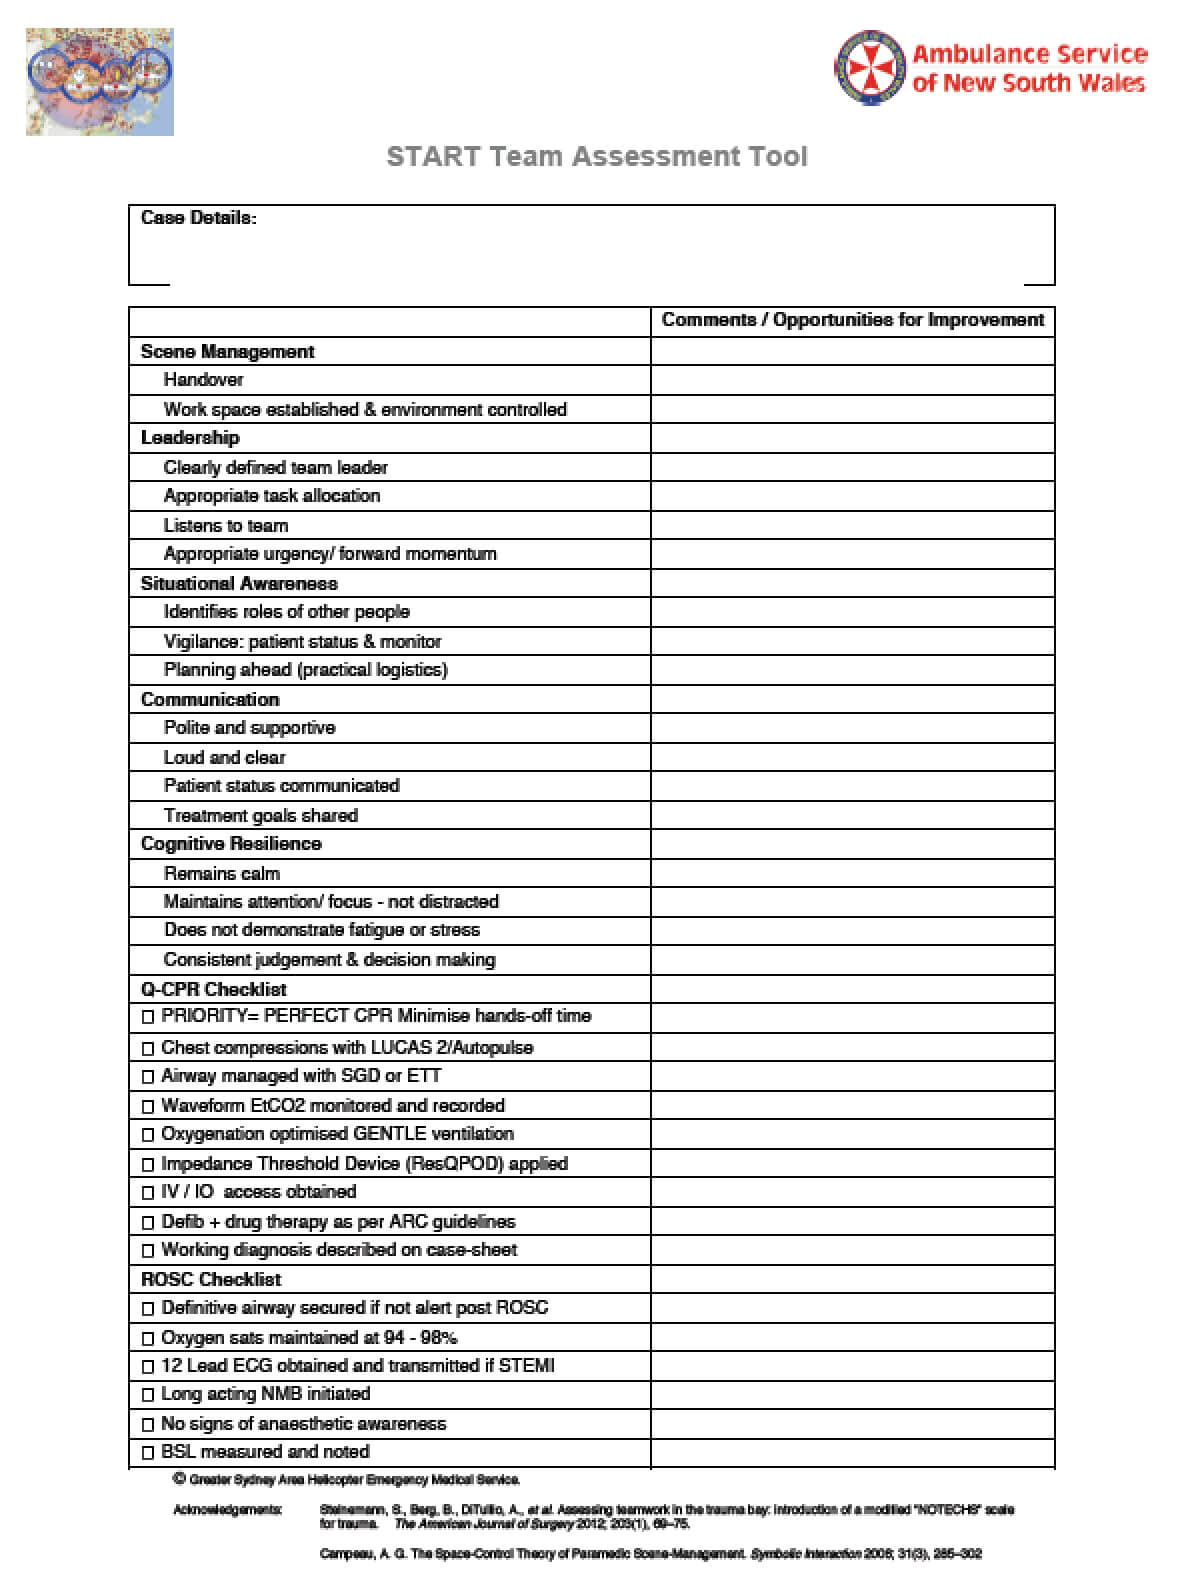 Debrief Template. Debrief Weekly Structure Amp Carb Refeed Inside Debriefing Report Template